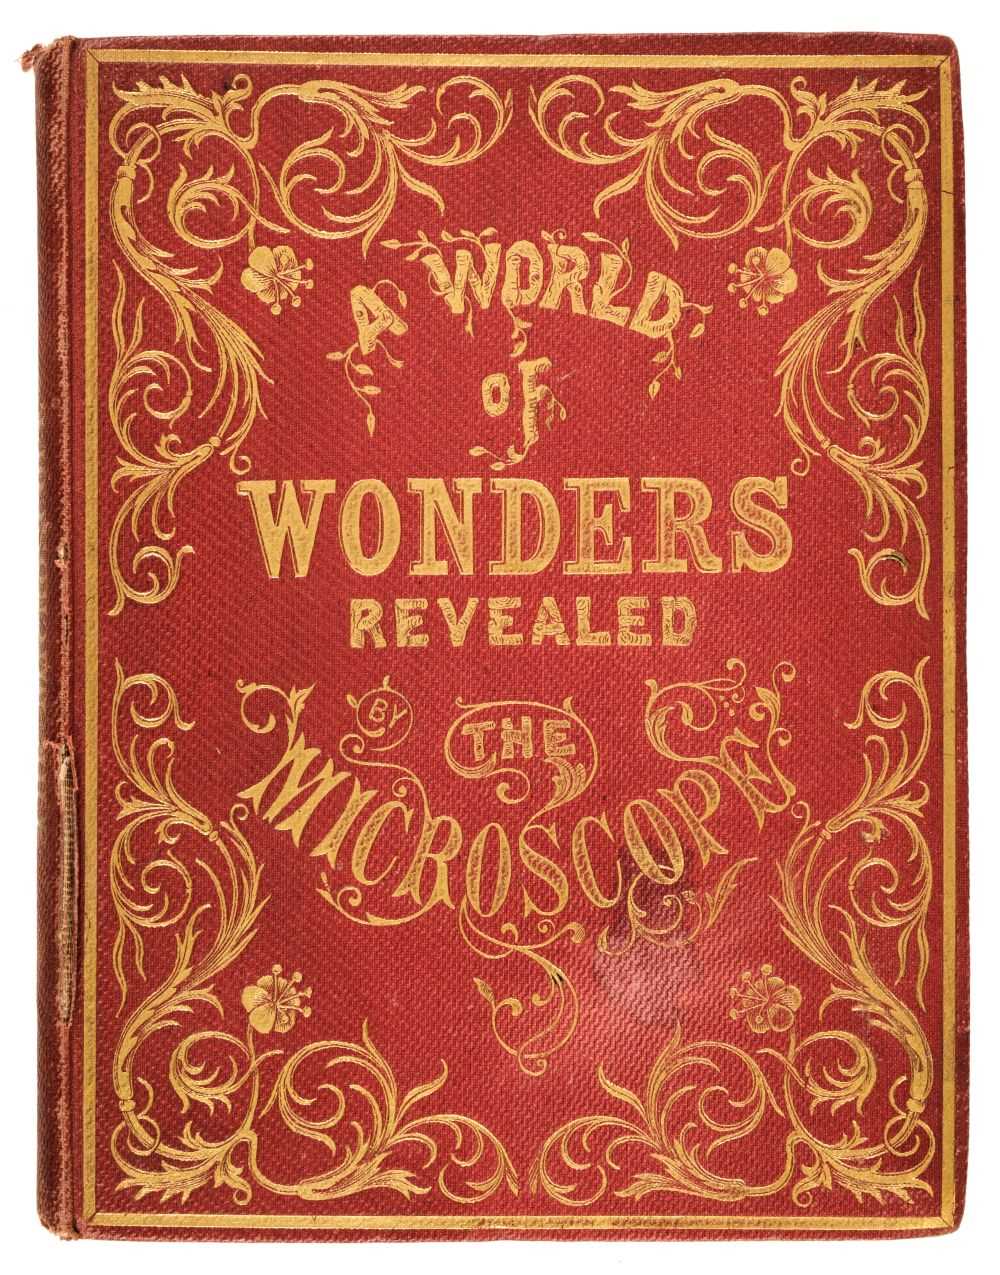 Lot 354 - Ward (Mary). A World of Wonders Revealed by The Microscope, A Book for Young Students, 1858